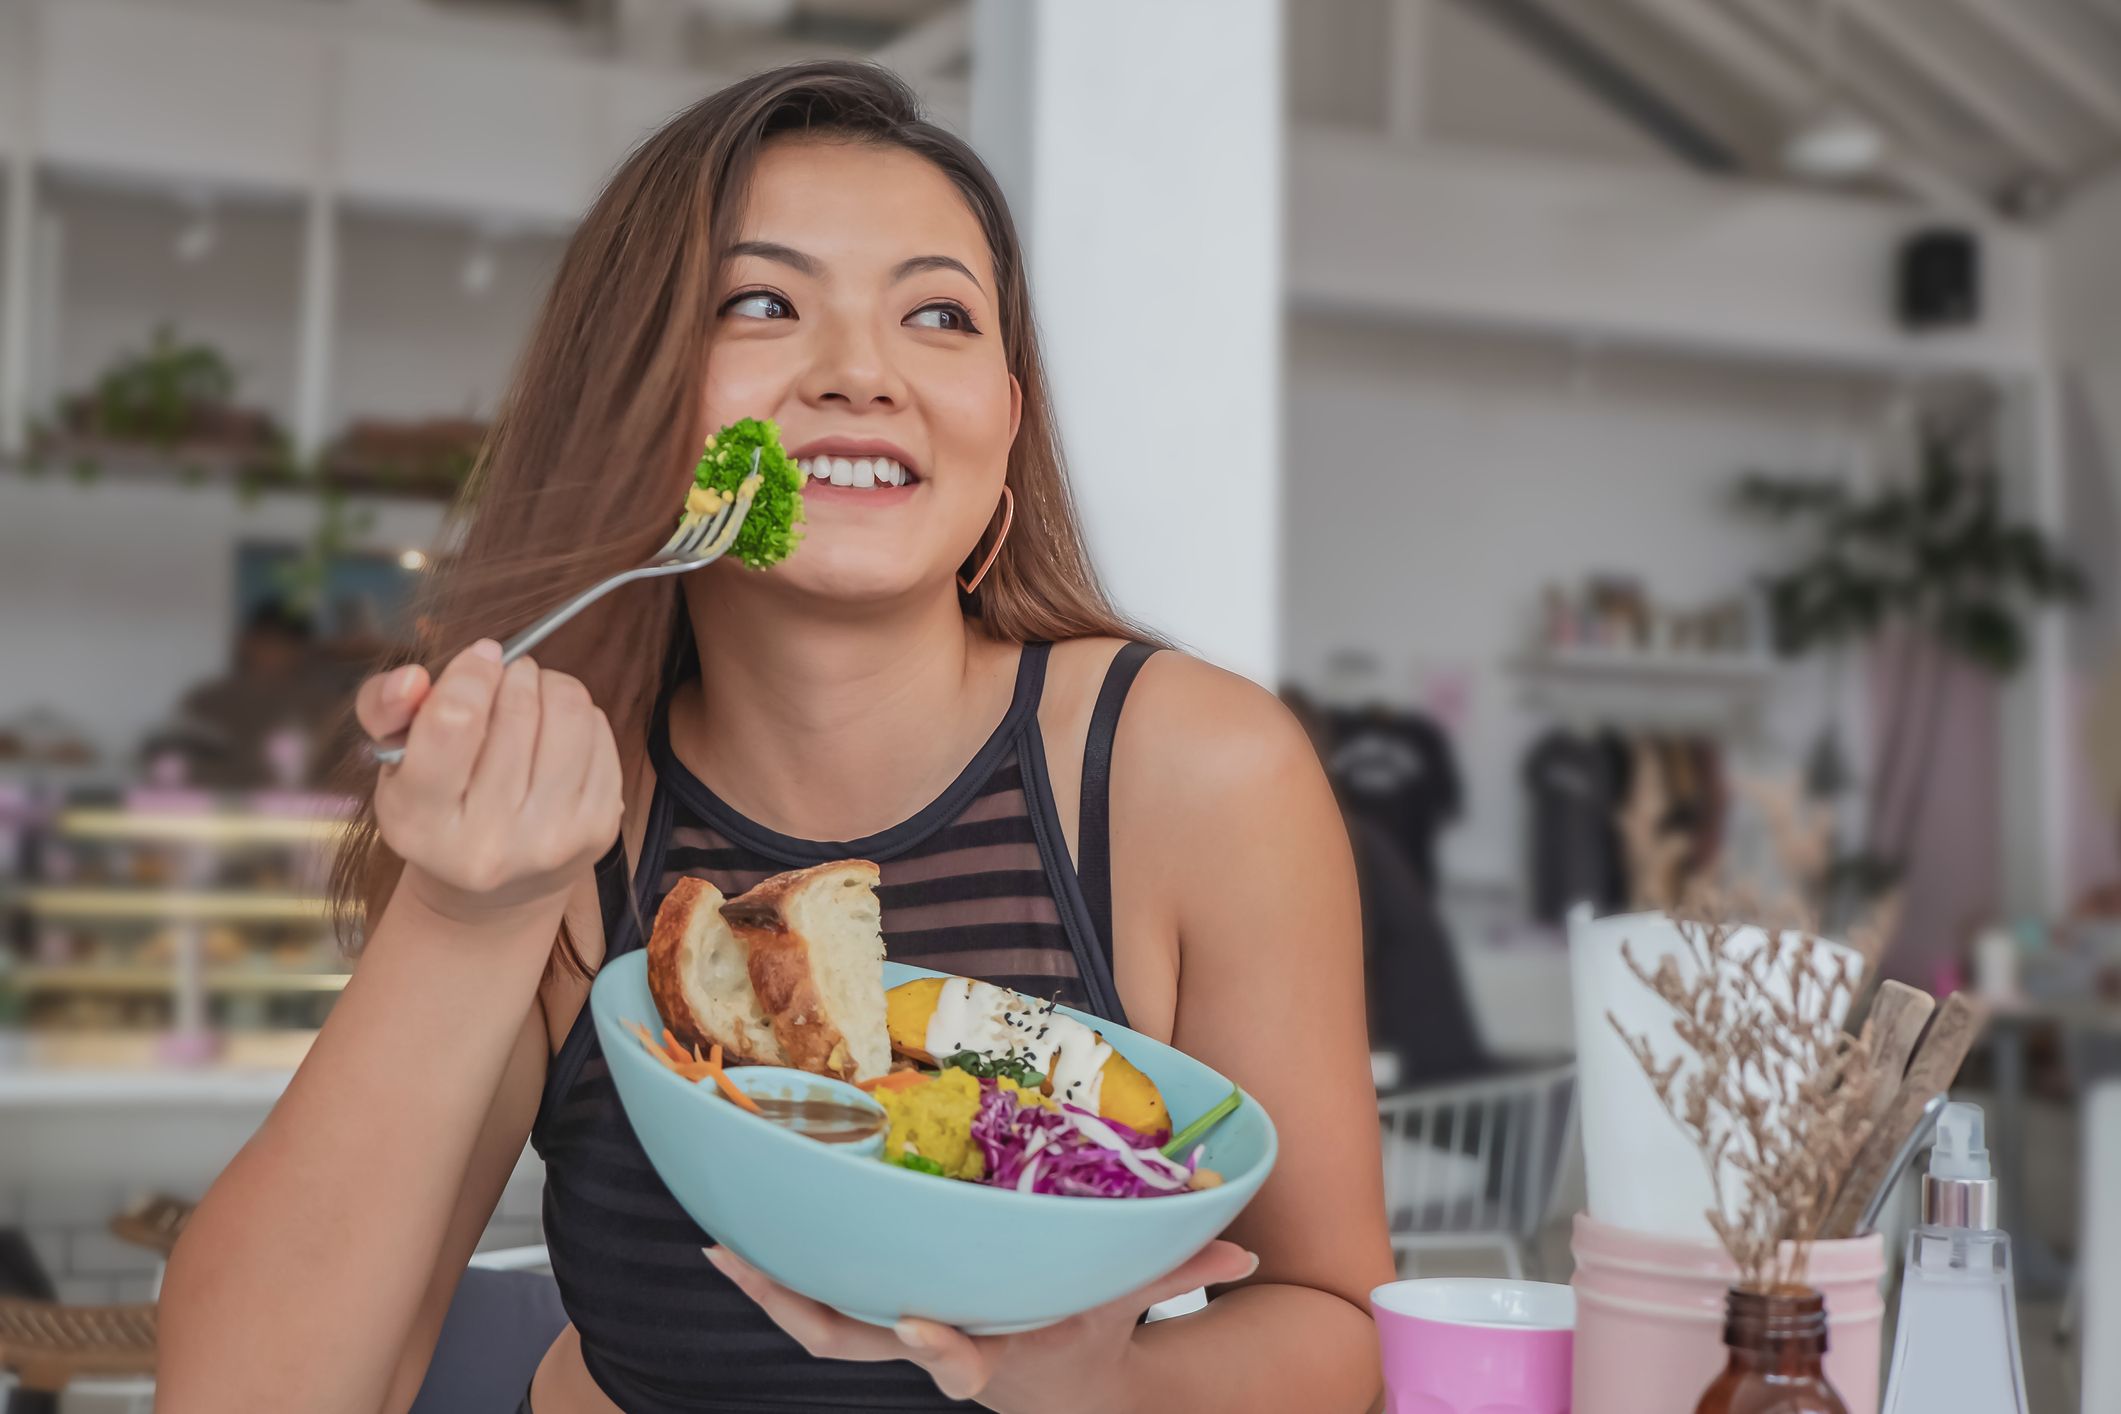 https://hips.hearstapps.com/hmg-prod/images/young-chinese-woman-eating-healthy-vegan-salad-in-a-royalty-free-image-1698866217.jpg